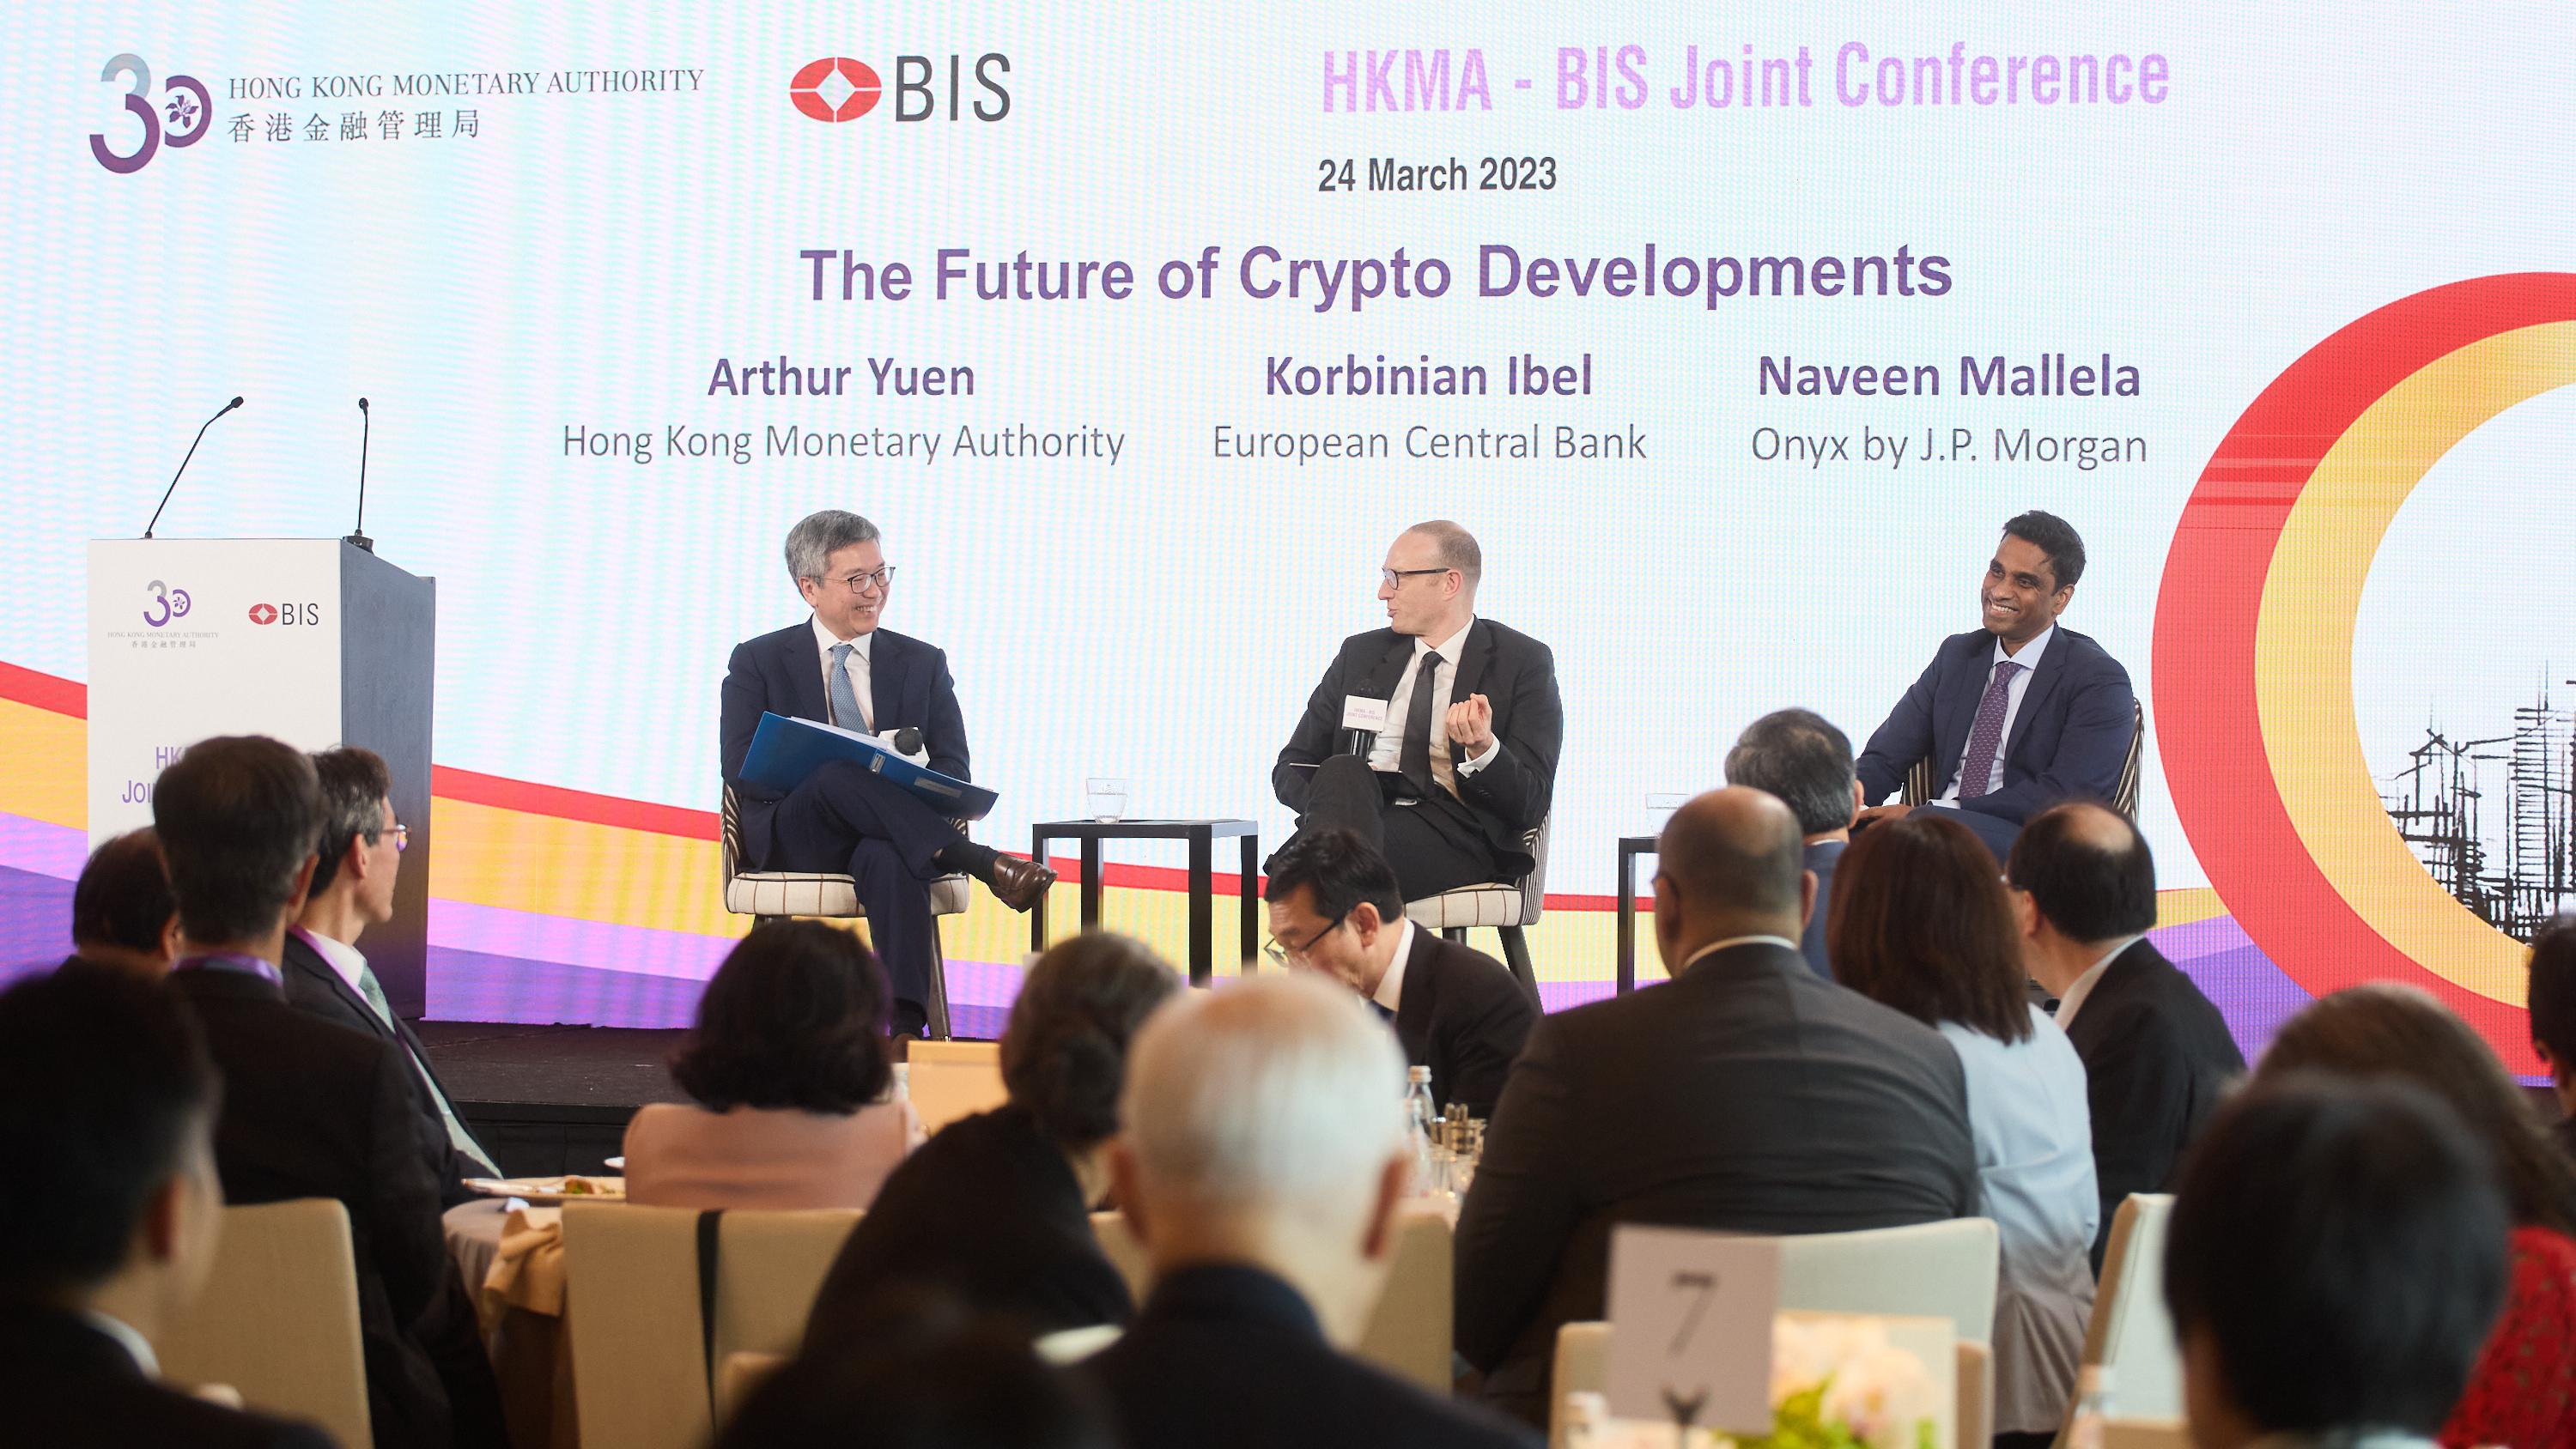 An international financial regulatory conference jointly co-organised by the Hong Kong Monetary Authority (HKMA) and the Bank for International Settlements was successfully concluded today (March 24) in Hong Kong. Photo shows (from left) Deputy Chief Executive of the HKMA Mr Arthur Yuen, hosts a fireside chat on "The future of crypto developments". The Director General of the European Central Bank, Mr Korbinian Ibel; and the Global Head of Coin Systems, Onyx by J.P. Morgan, Mr Naveen Mallela, share their insights on the lessons learnt from recent crypto incidents and explore the future of the crypto market.